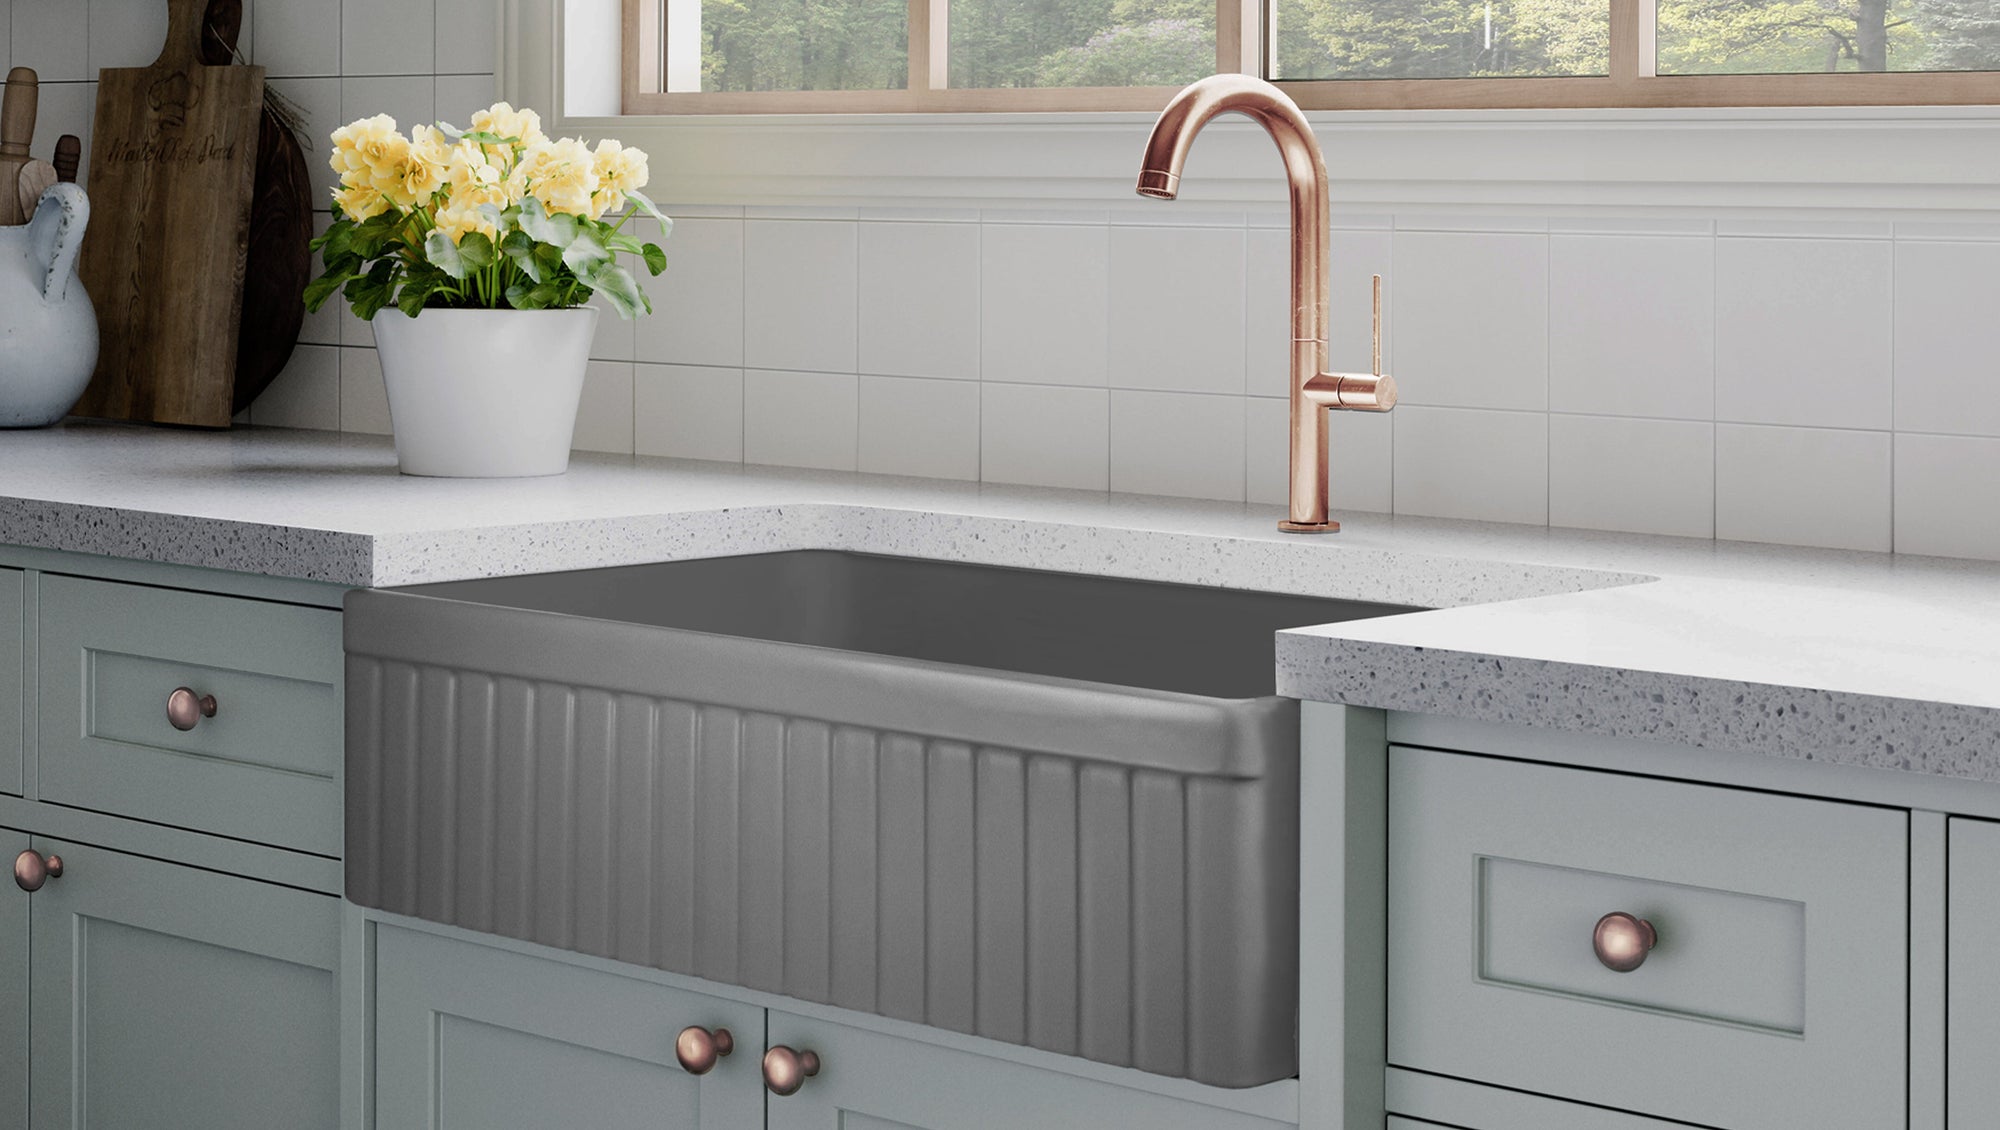 FSW1047RG LUX 33-INCH SOLID FIRECLAY FARMHOUSE SINK, MATTE GRAY, POL. ROSE GOLD ACCS, FLUTED FRONT